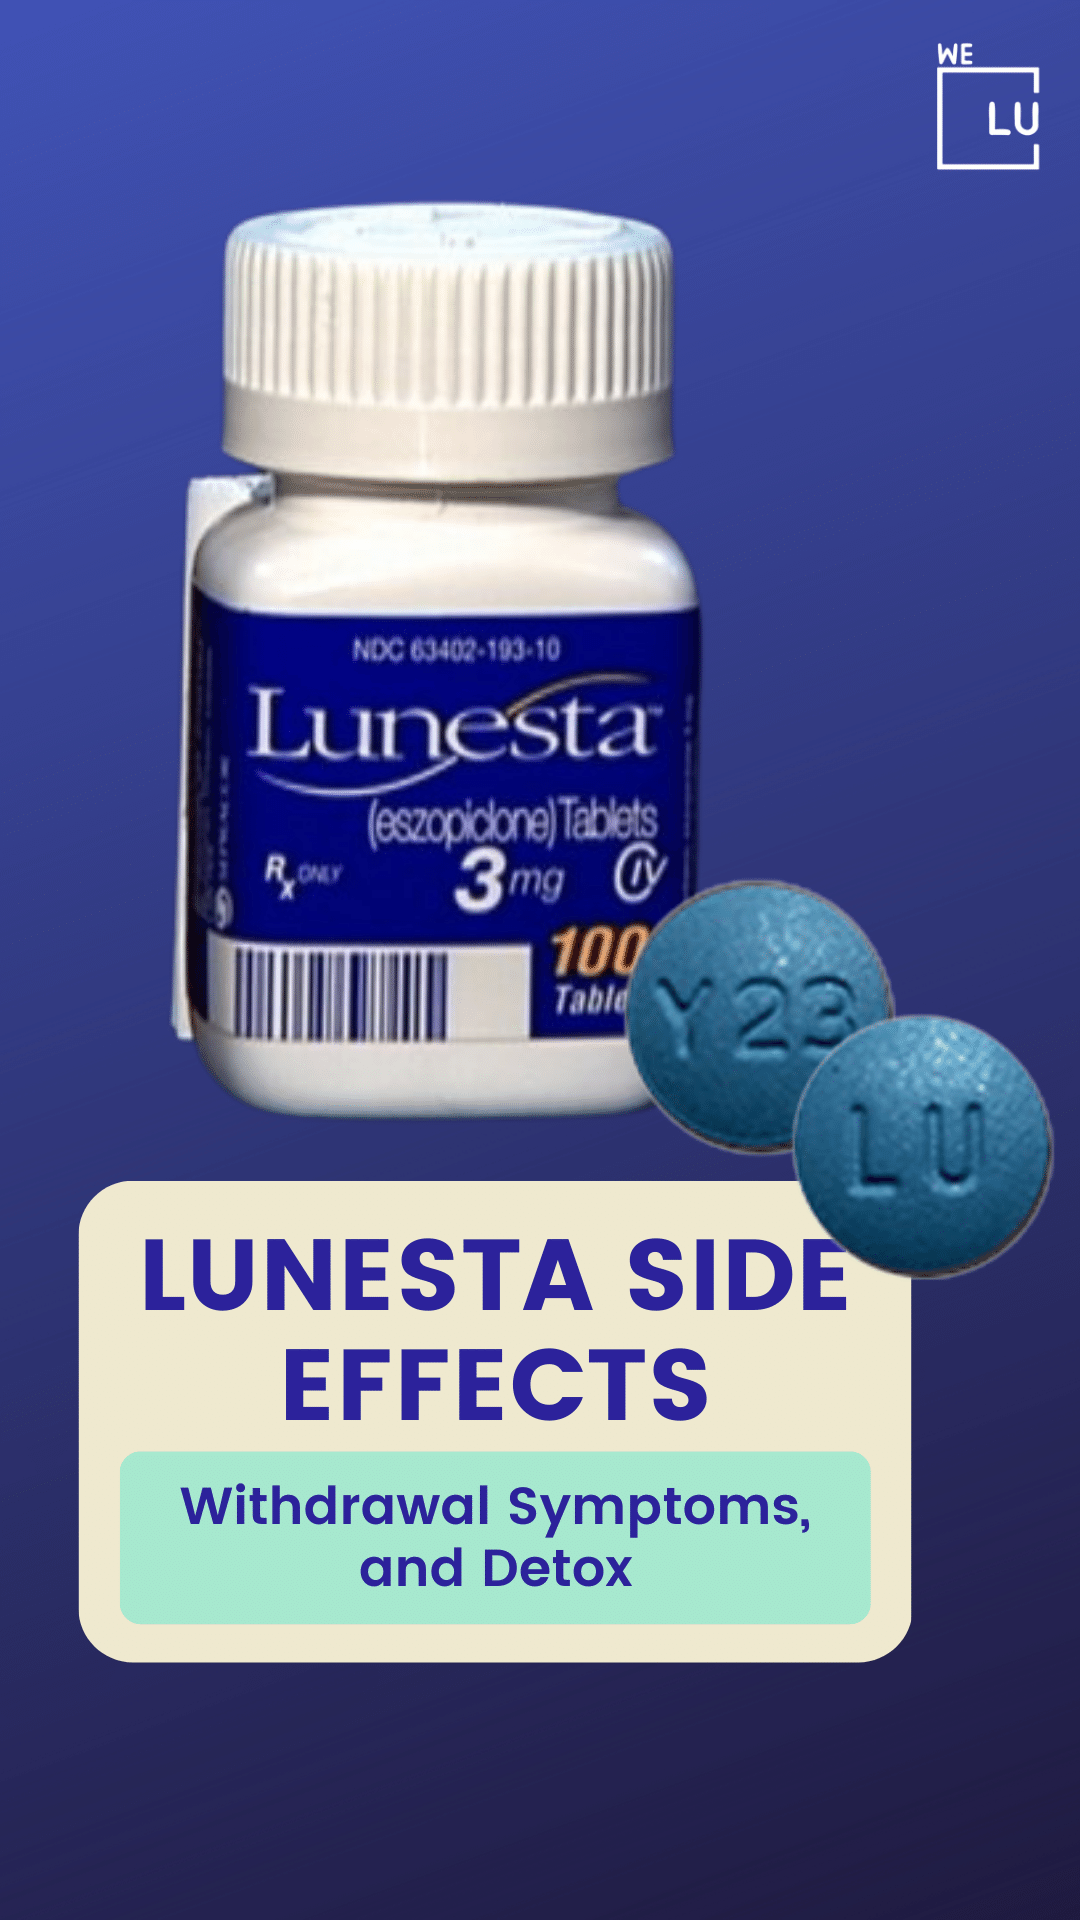 Lunesta Side Effects, Withdrawal Symptoms, and Detox